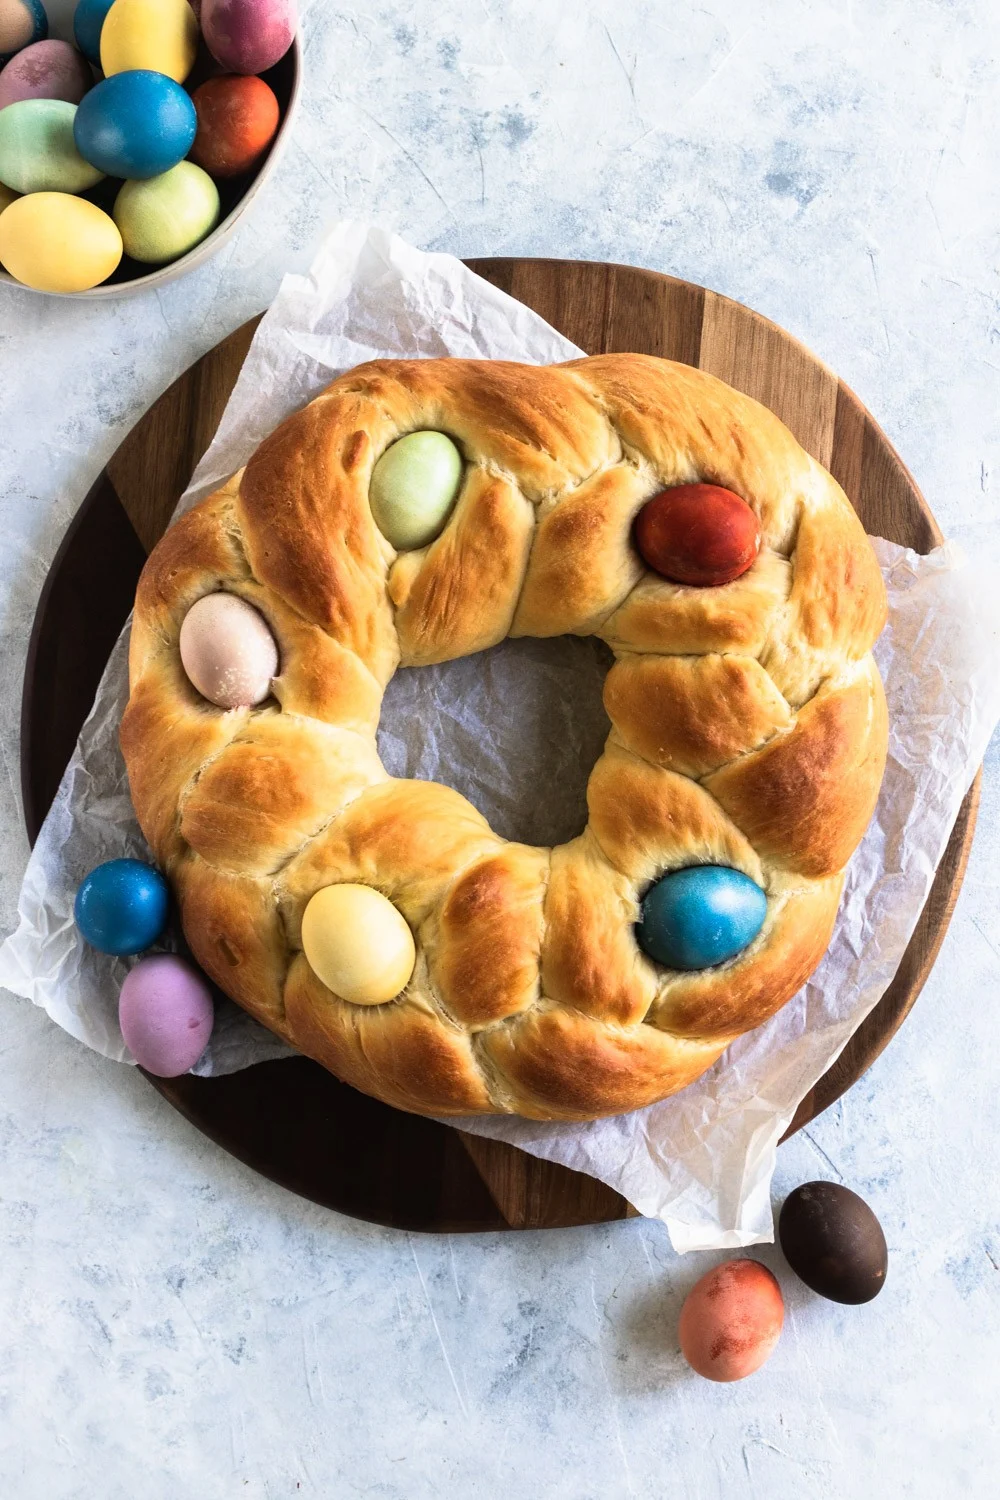 Italian Easter Bread is a braid circle loaf decorated on top with dyed Easter eggs.